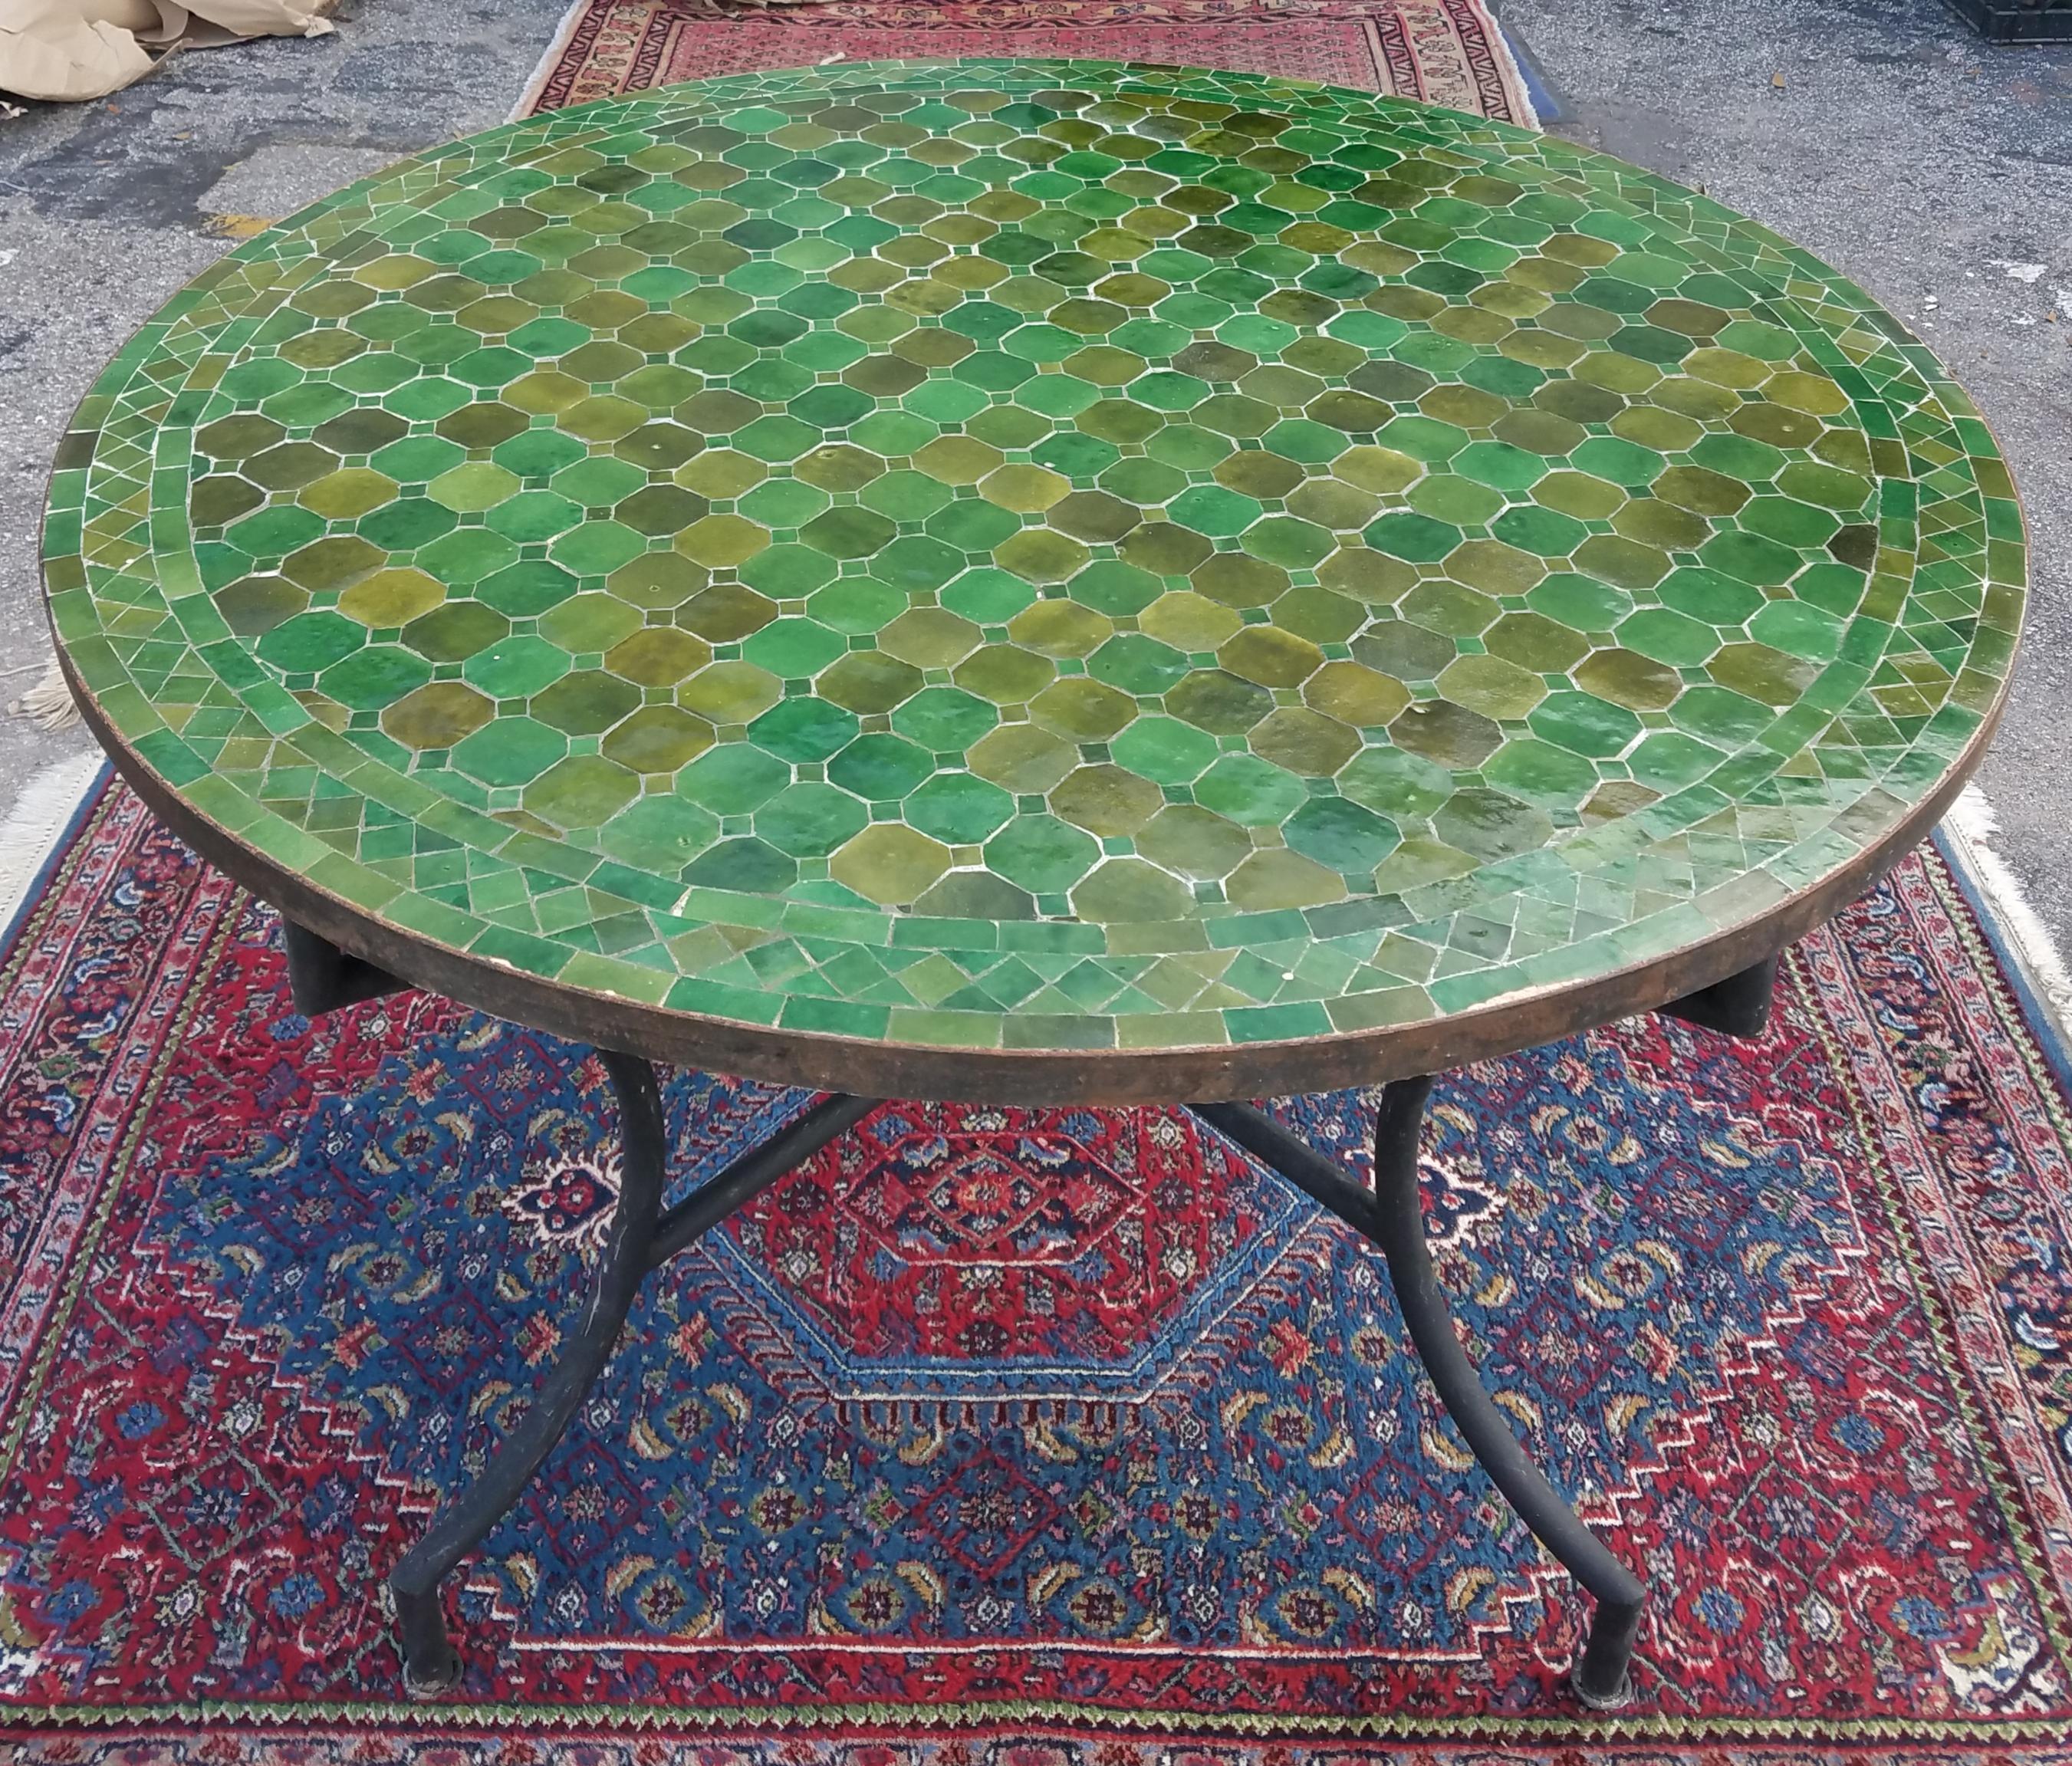 Round Moroccan Mosaic Table, Tamegroute Green 2